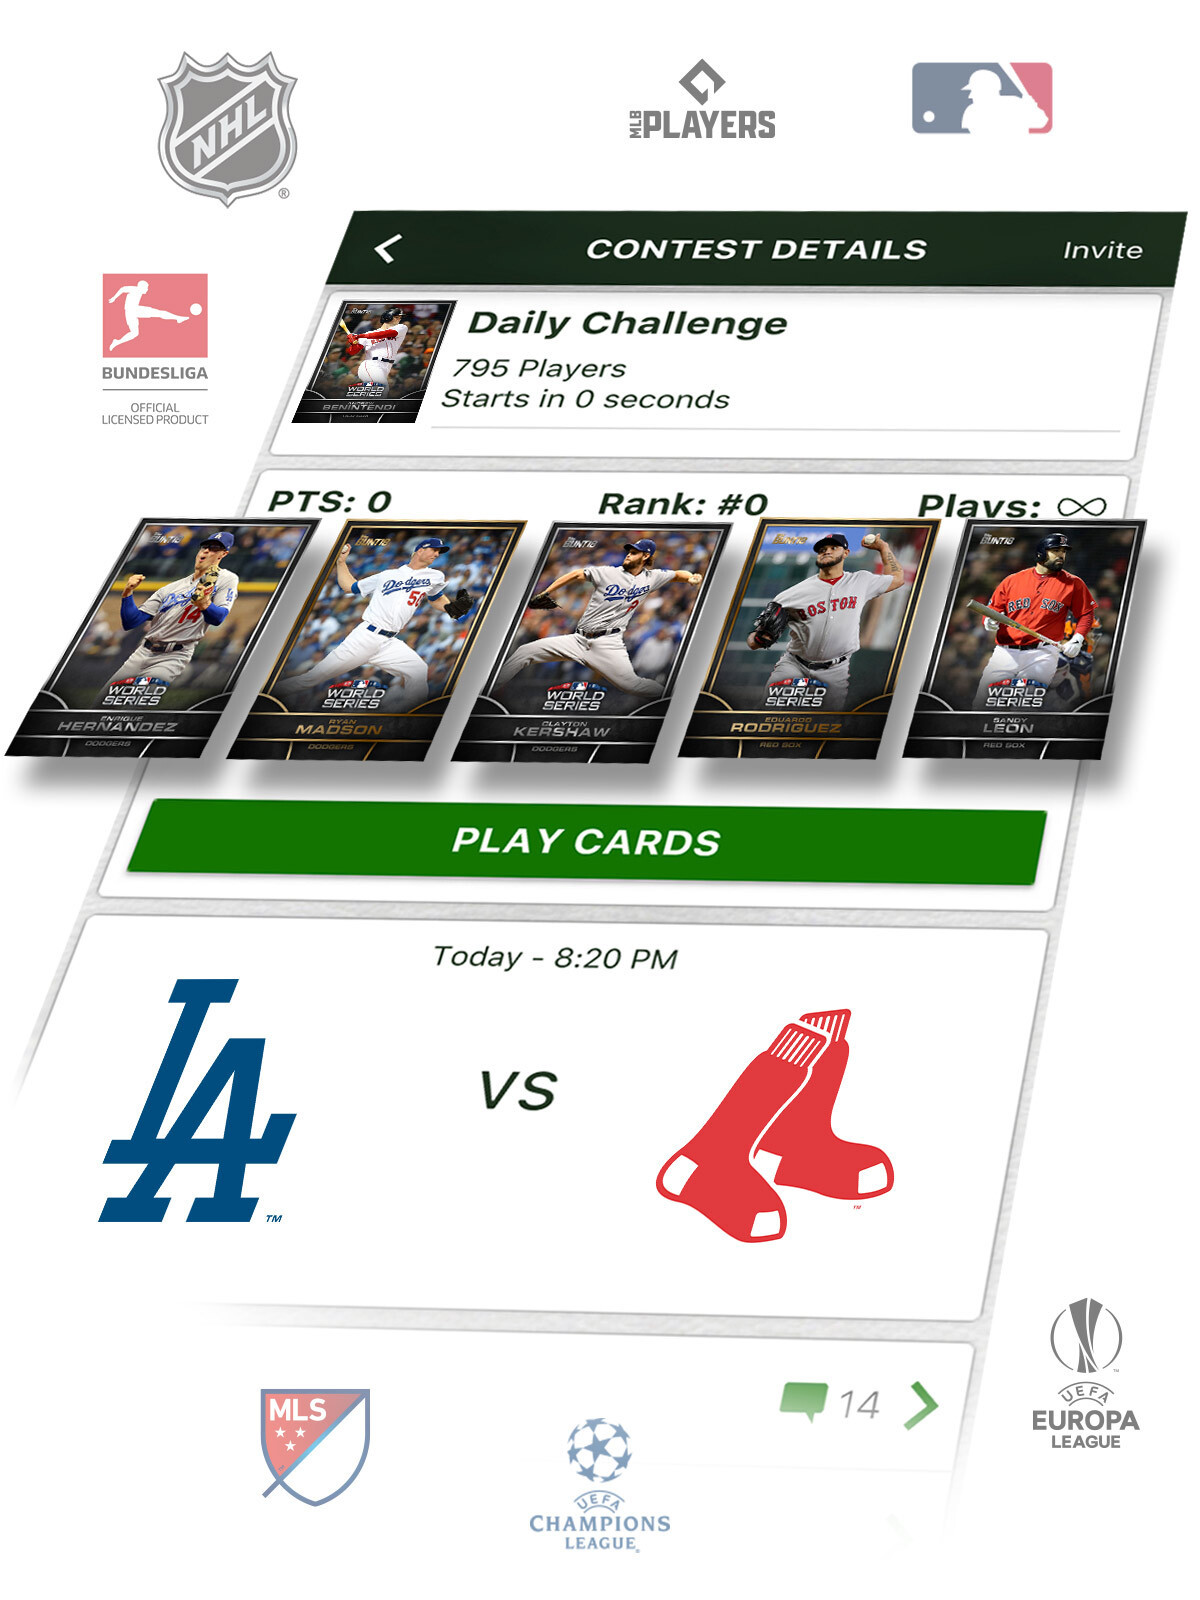 topps-digital-collectibles-reimagined-topps